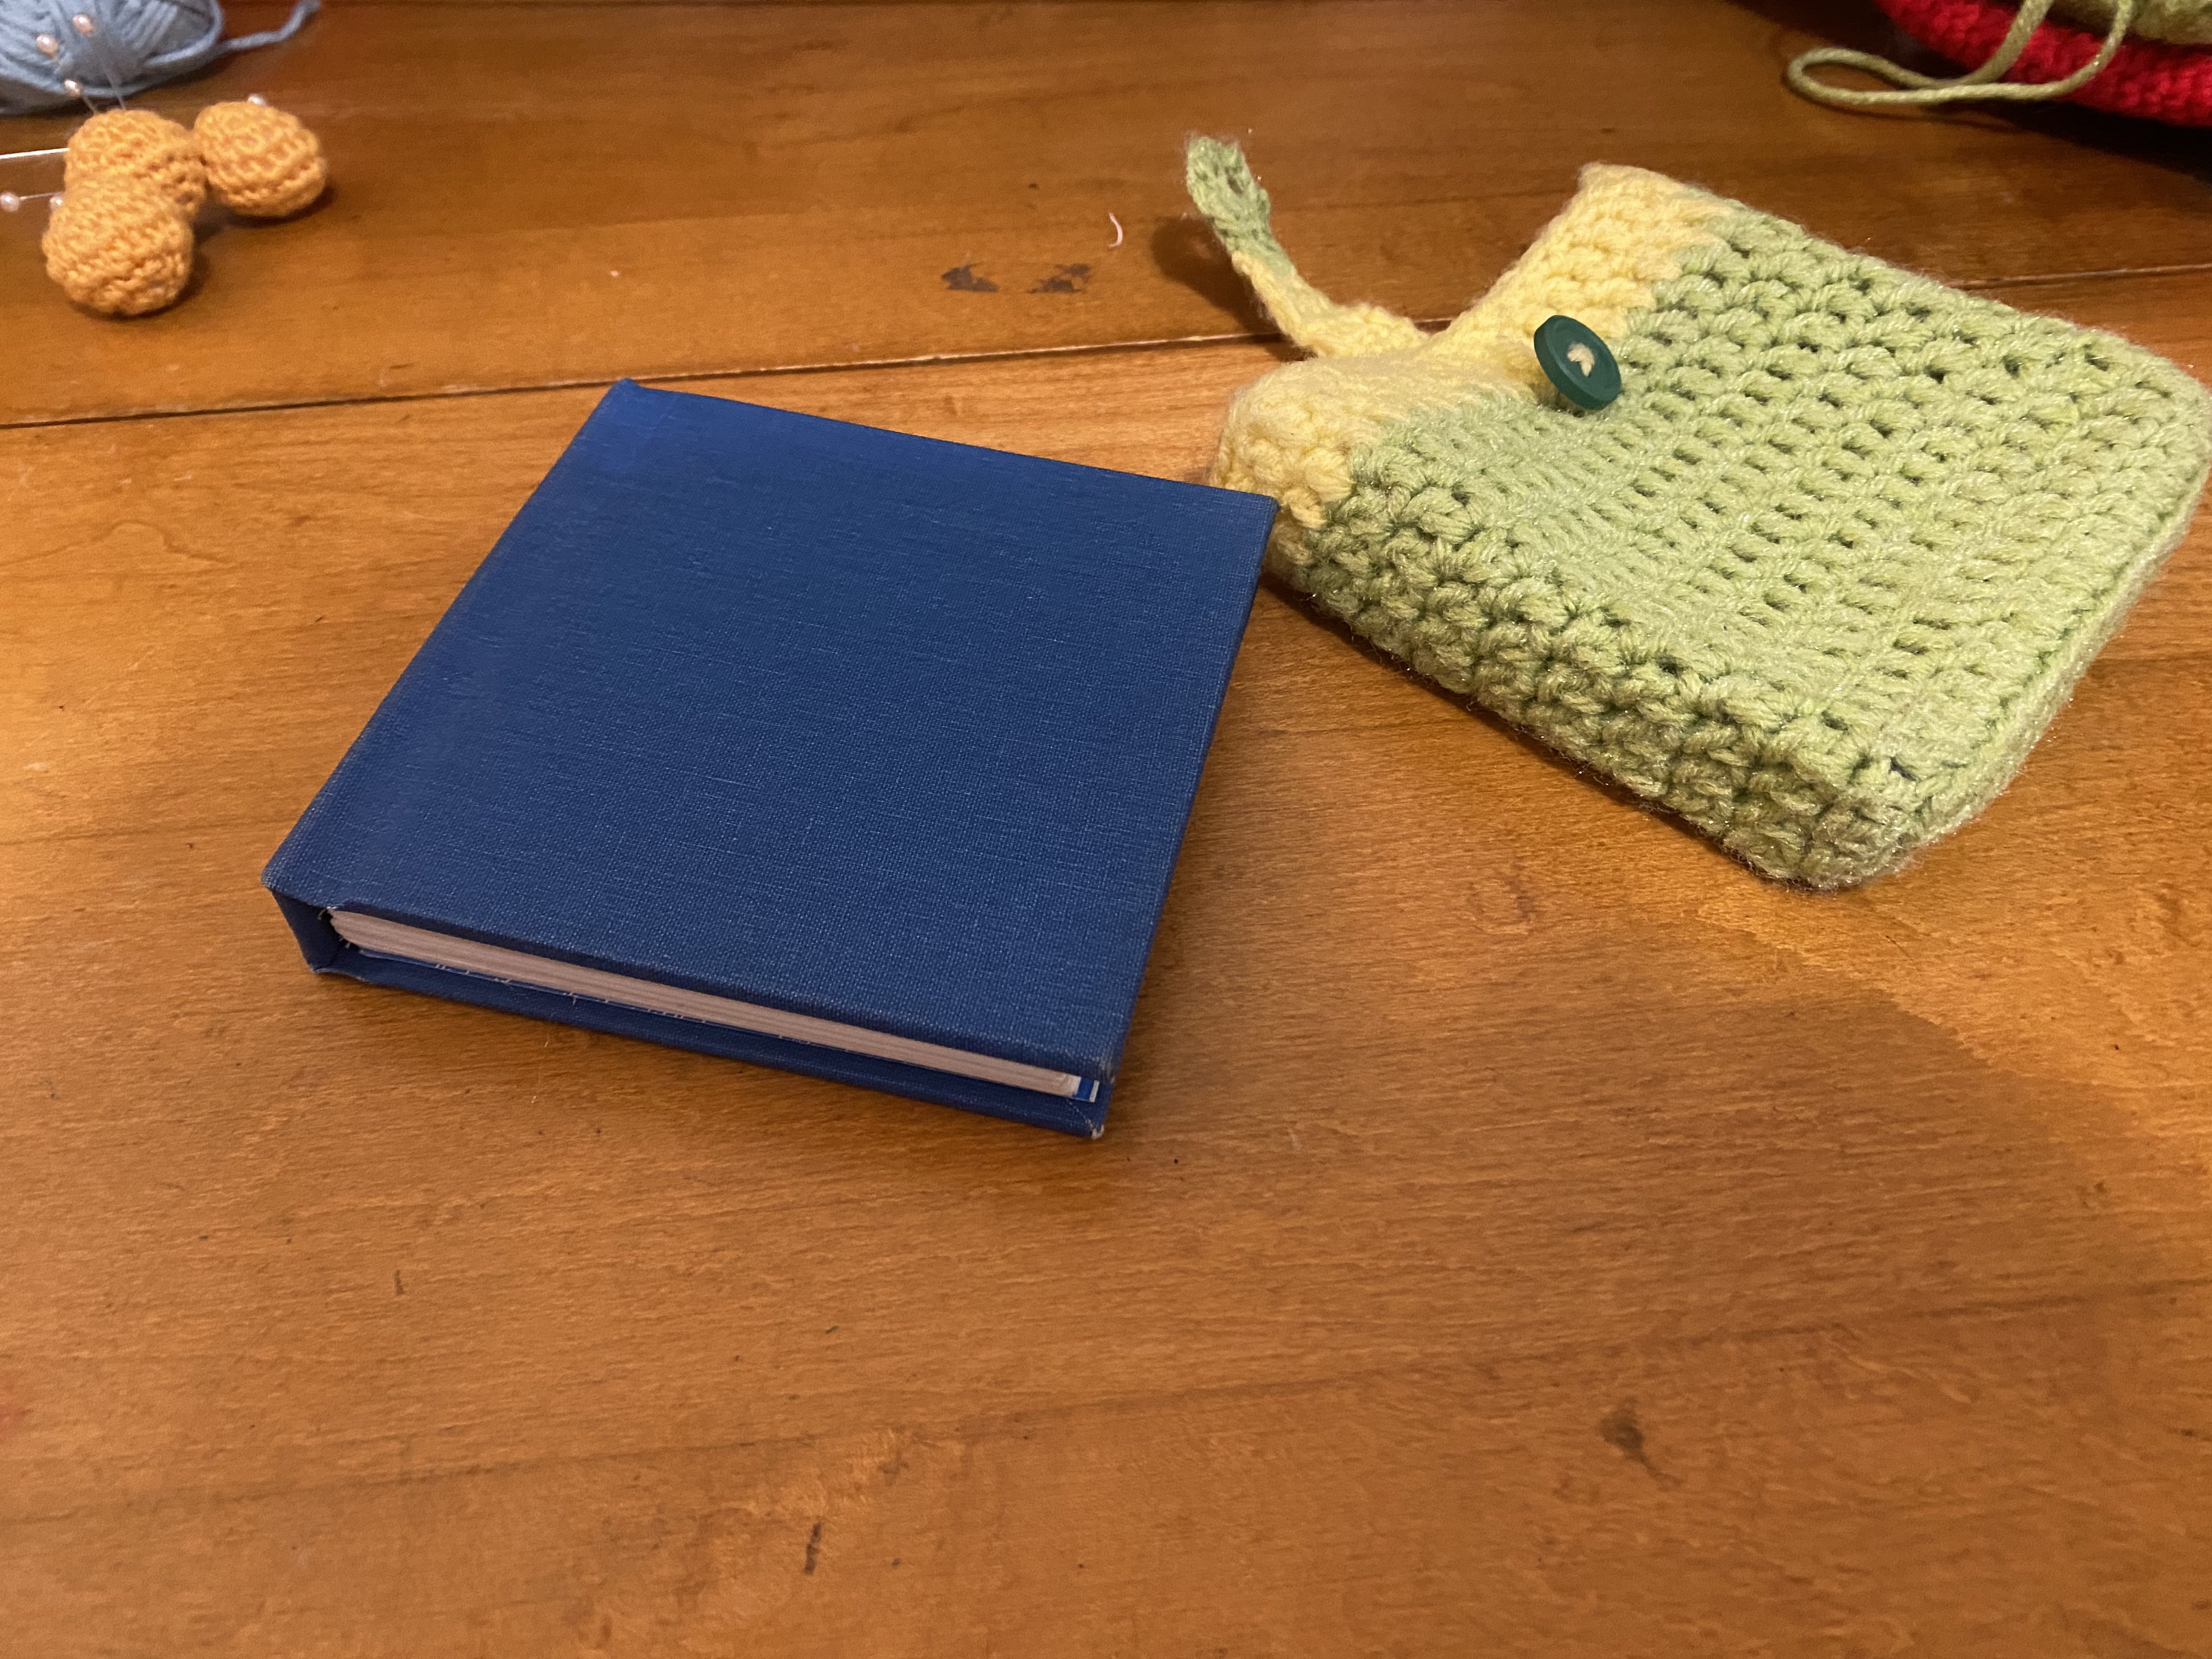 A hard cover book next to a crochet cover